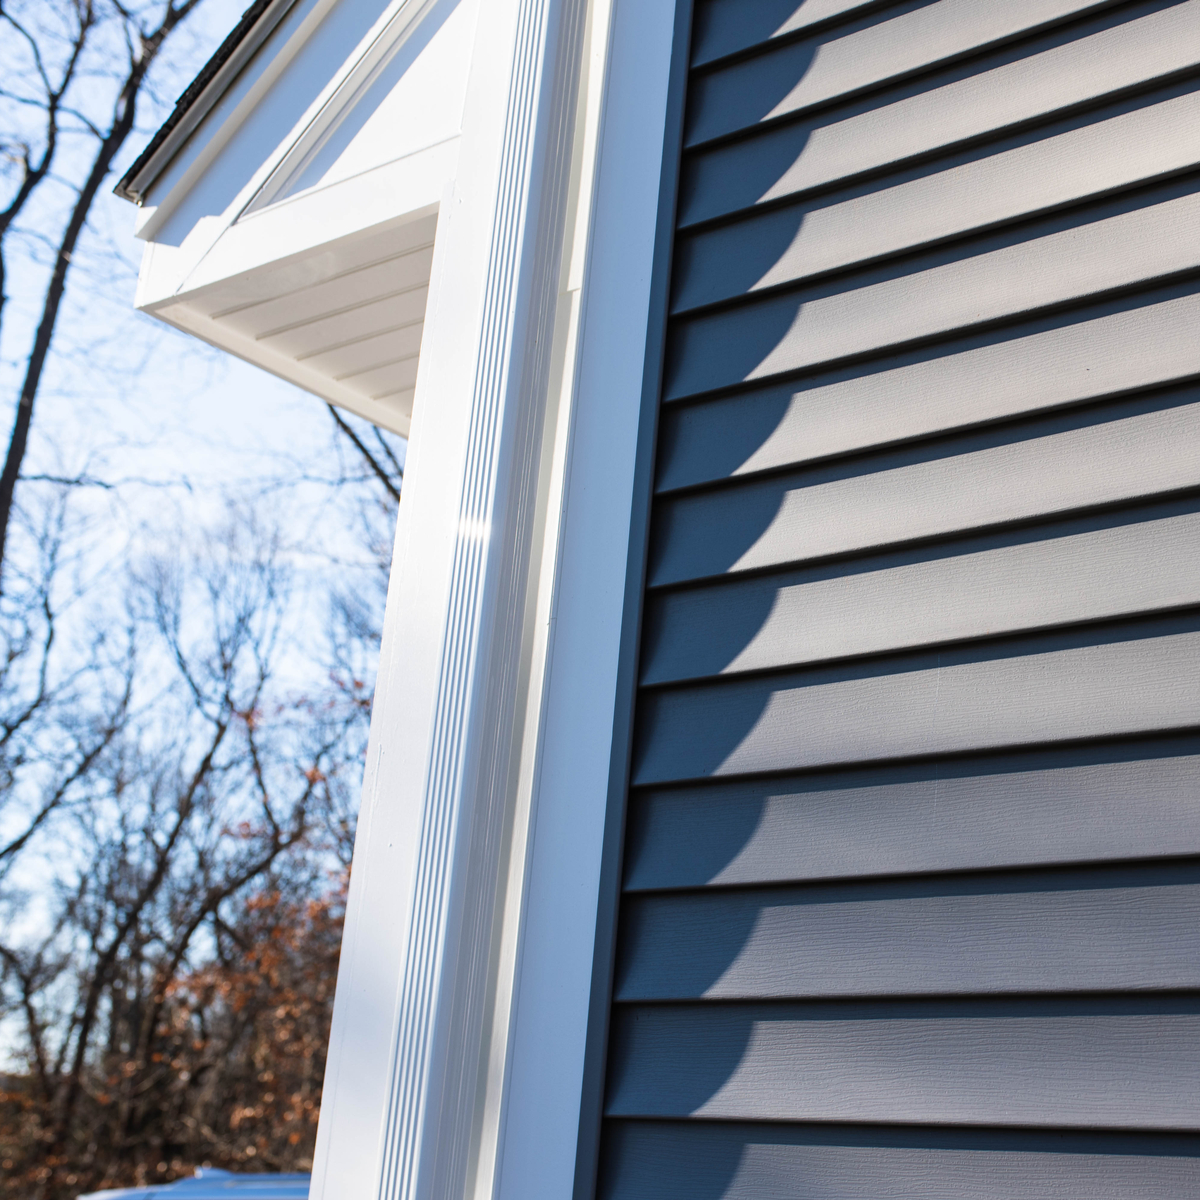 Get Home Siding Installation and Repairs from Evergreen Home Exteriors!